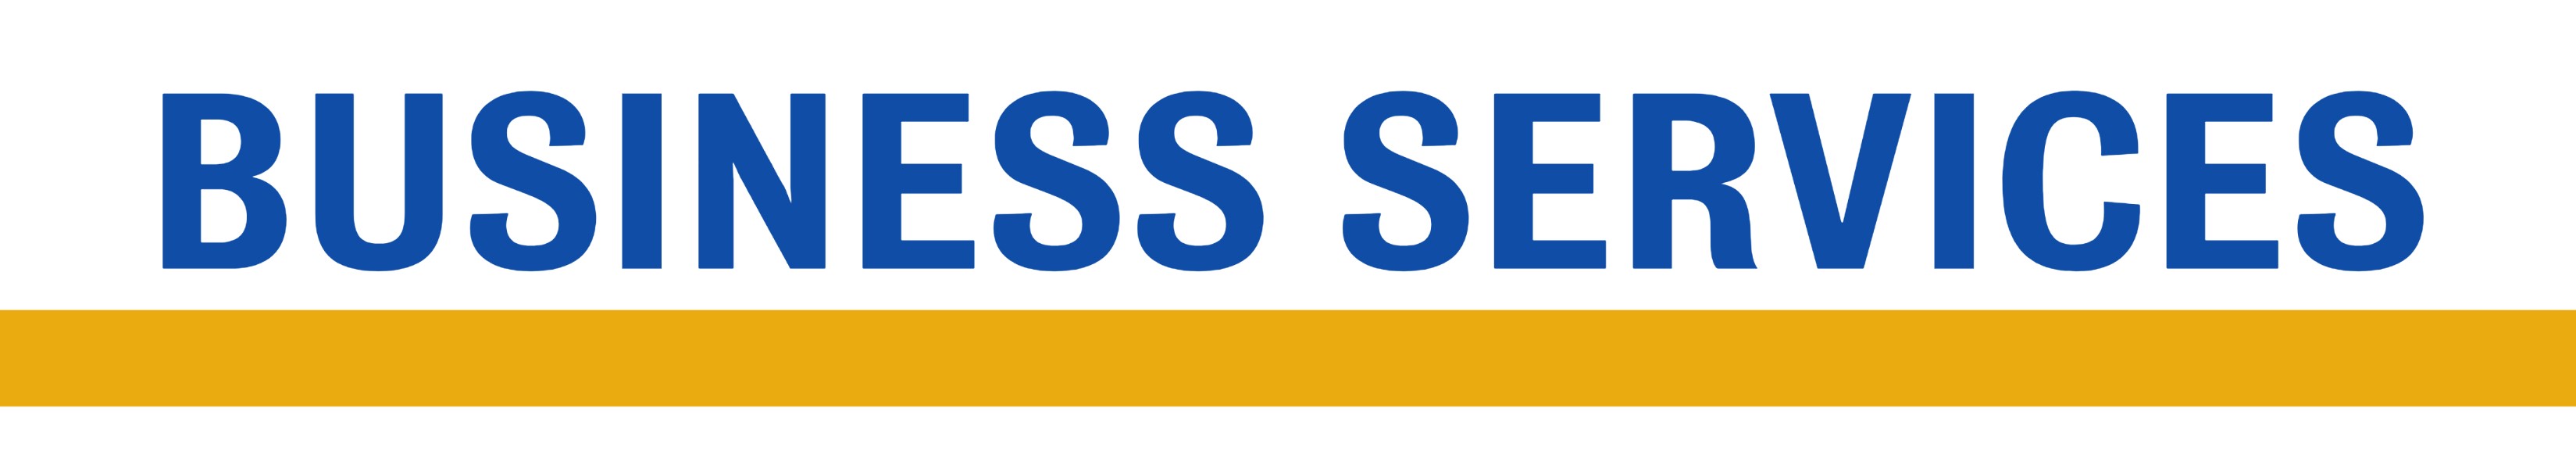 Banner image that mentions Business Services. 
